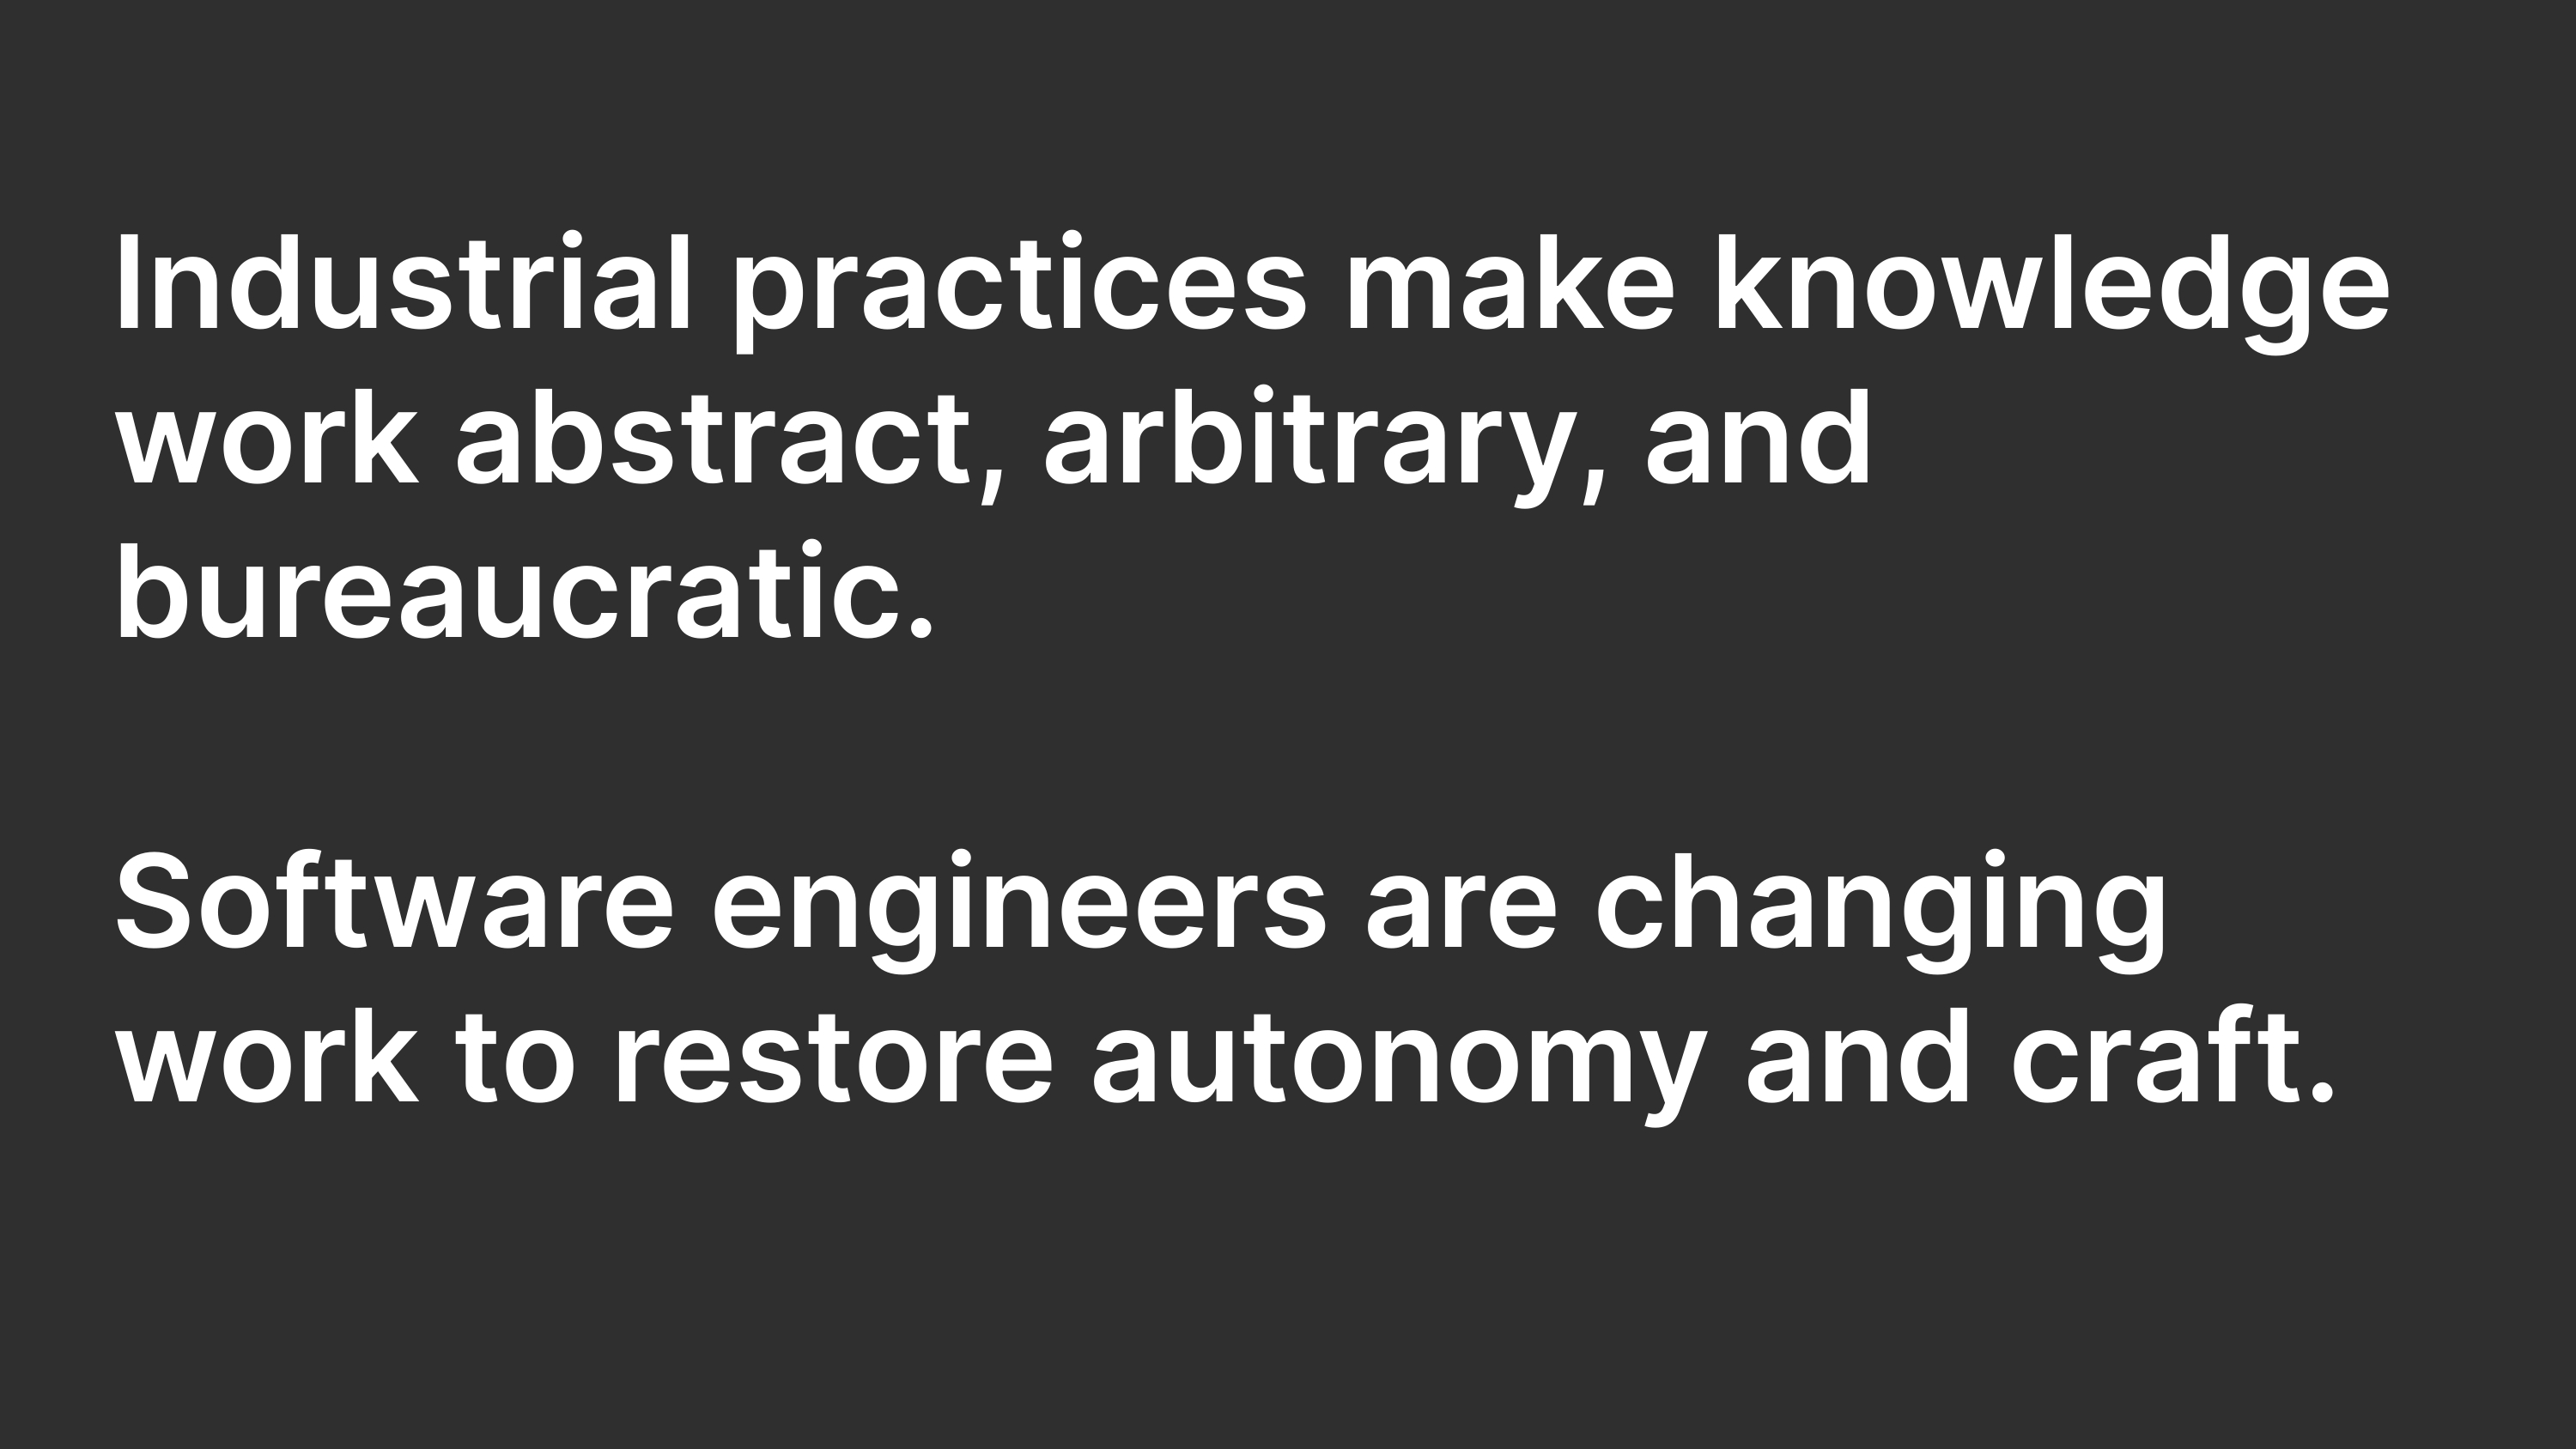 Industrial practices make knowledge work abstract, arbitrary, and bureaucratic. Software engineers are changing work to restore autonomy and craft.